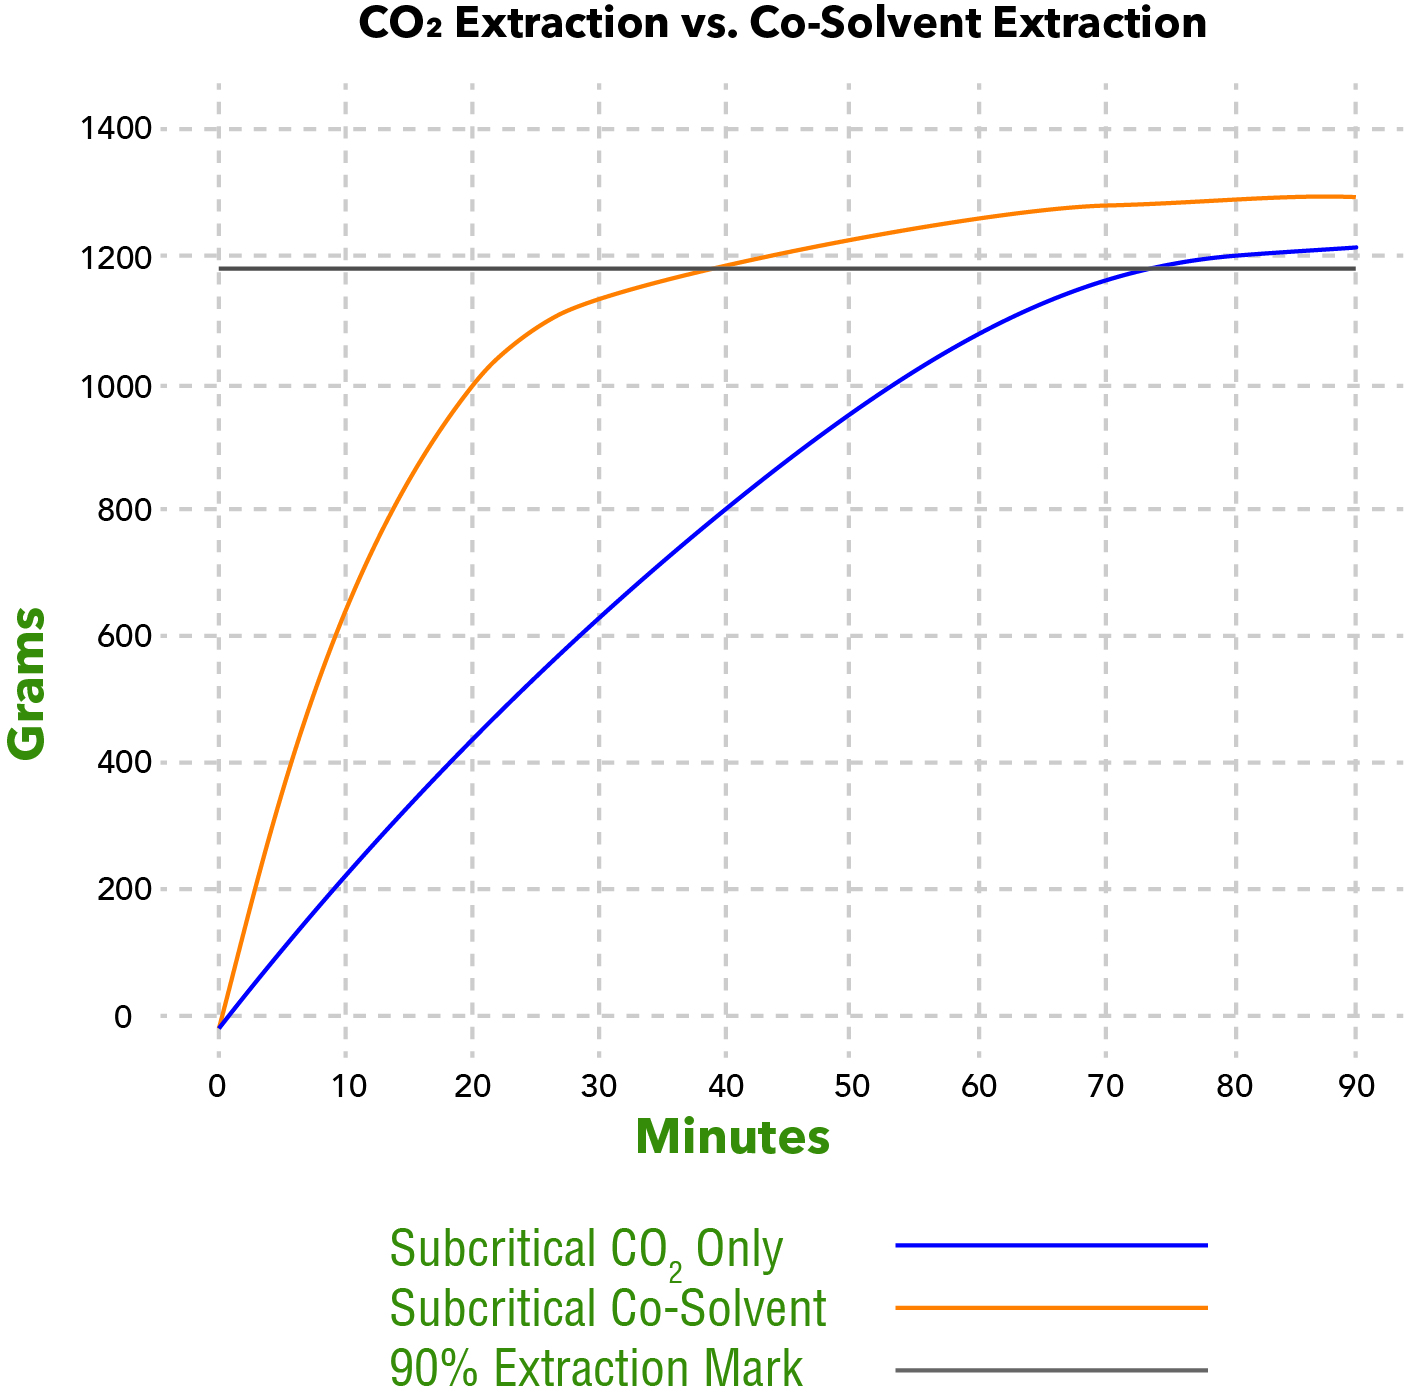 https://campaign-image.com/zohocampaigns/122231000017271852_zc_v32_co2_only_vs_co_solvent.jpg